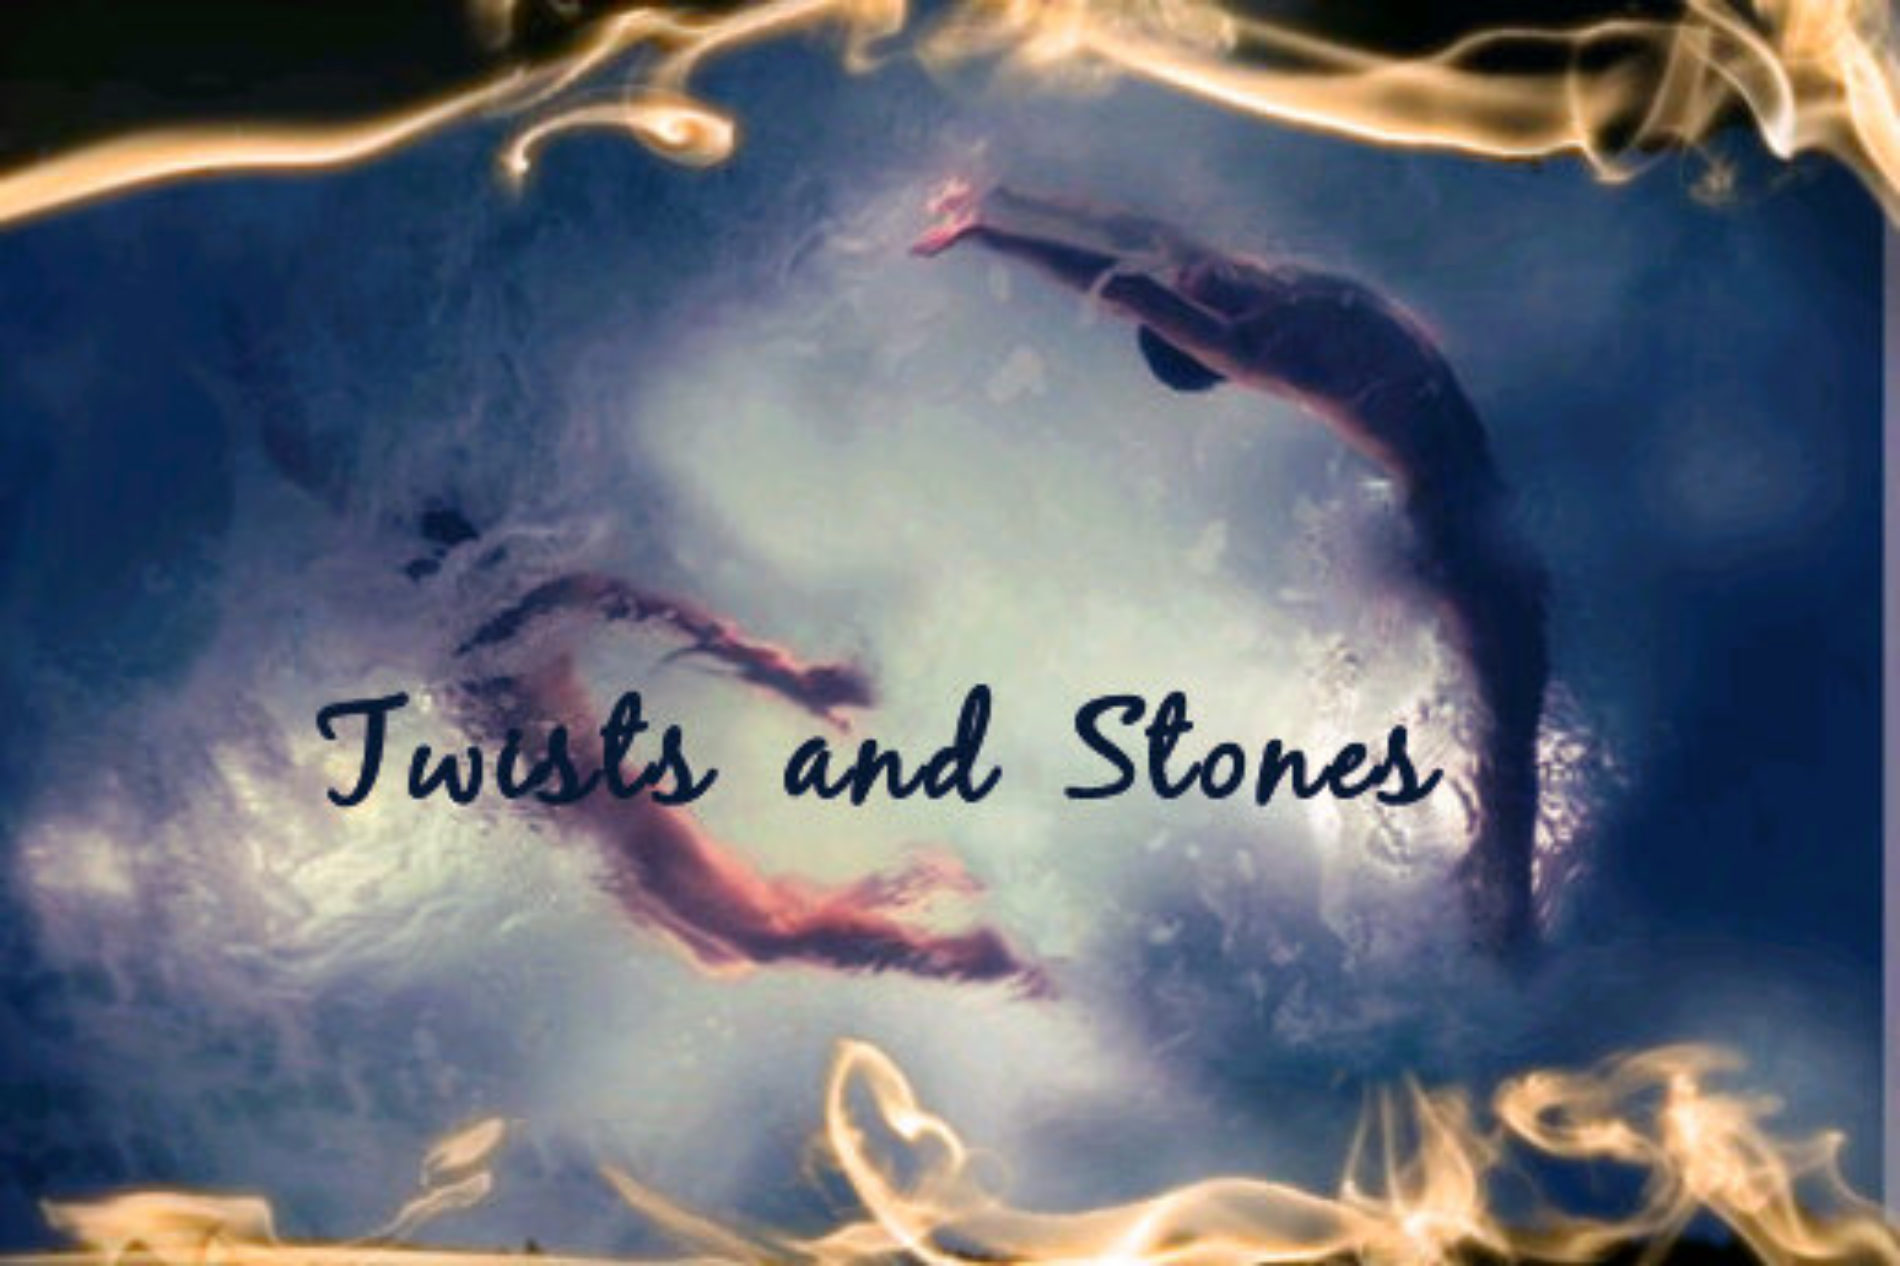 TWISTS AND STONES (Episode 5)